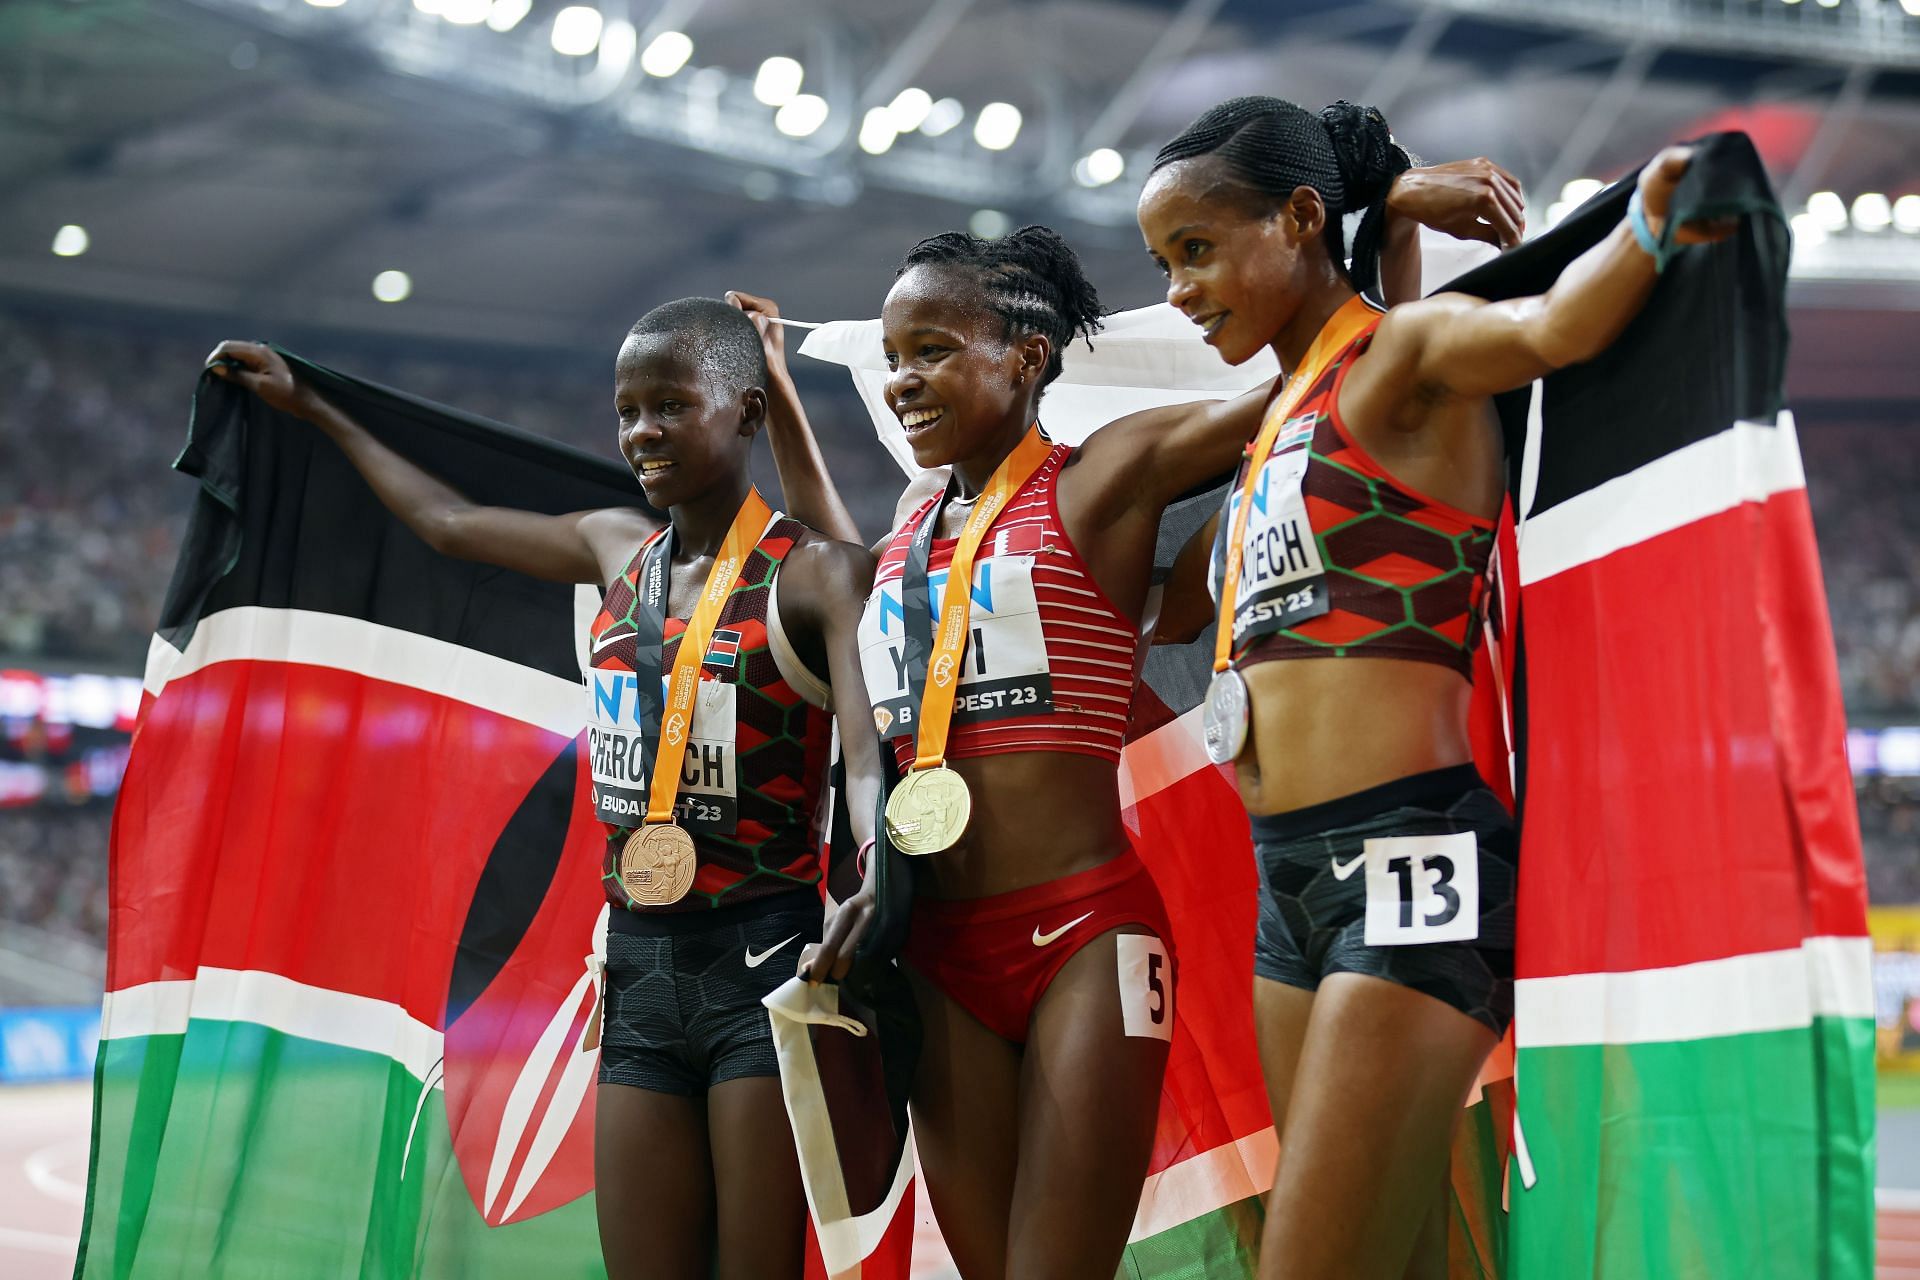 Bronze medalist Faith Cherotich of Team Kenya, gold medalist Winfred Mutile Yavi of Team Bahrain and silver medalist Beatrice Chepkoech of Team Kenya during Day 9 of the 2023 World Athletics Championships 